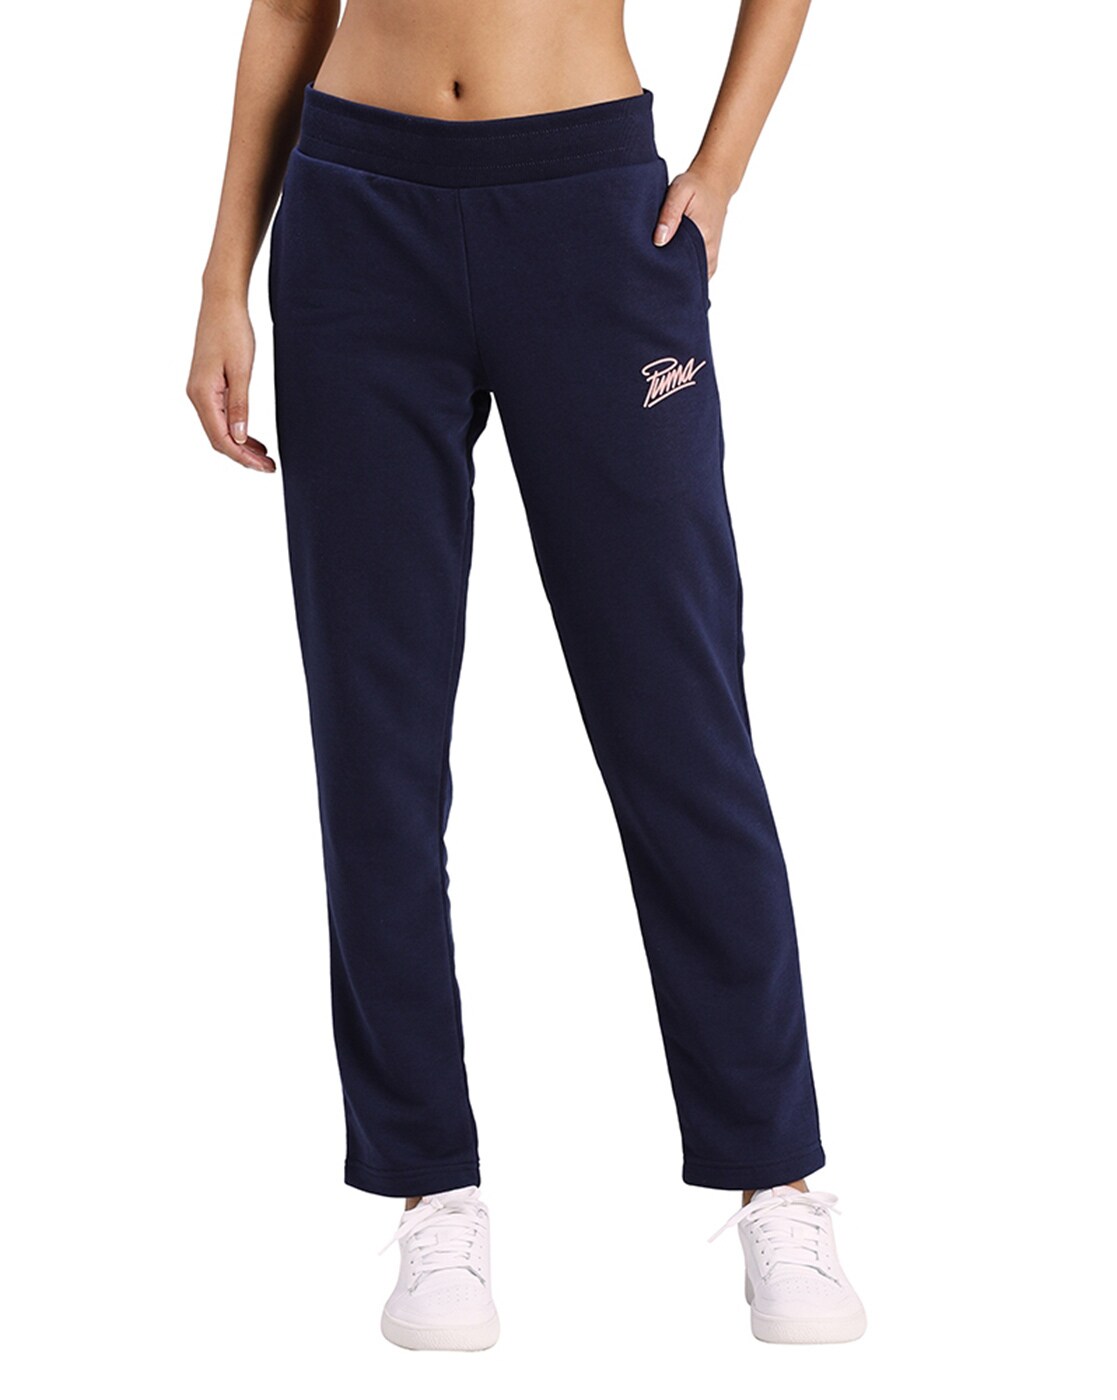 Buy Blue Track Pants for Women by Puma Online